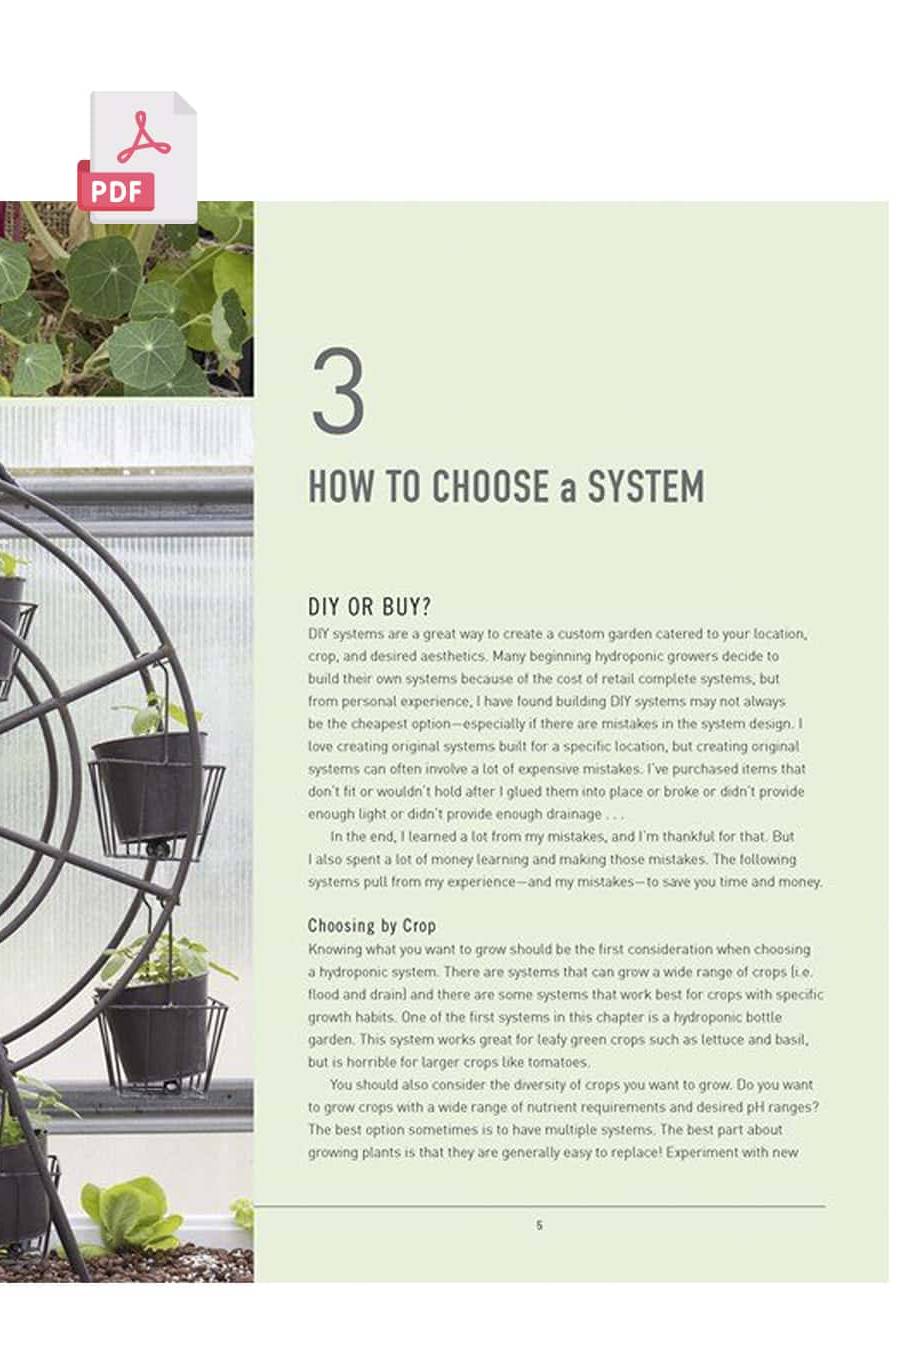 DIY Hydroponic Gardens - 192 pages